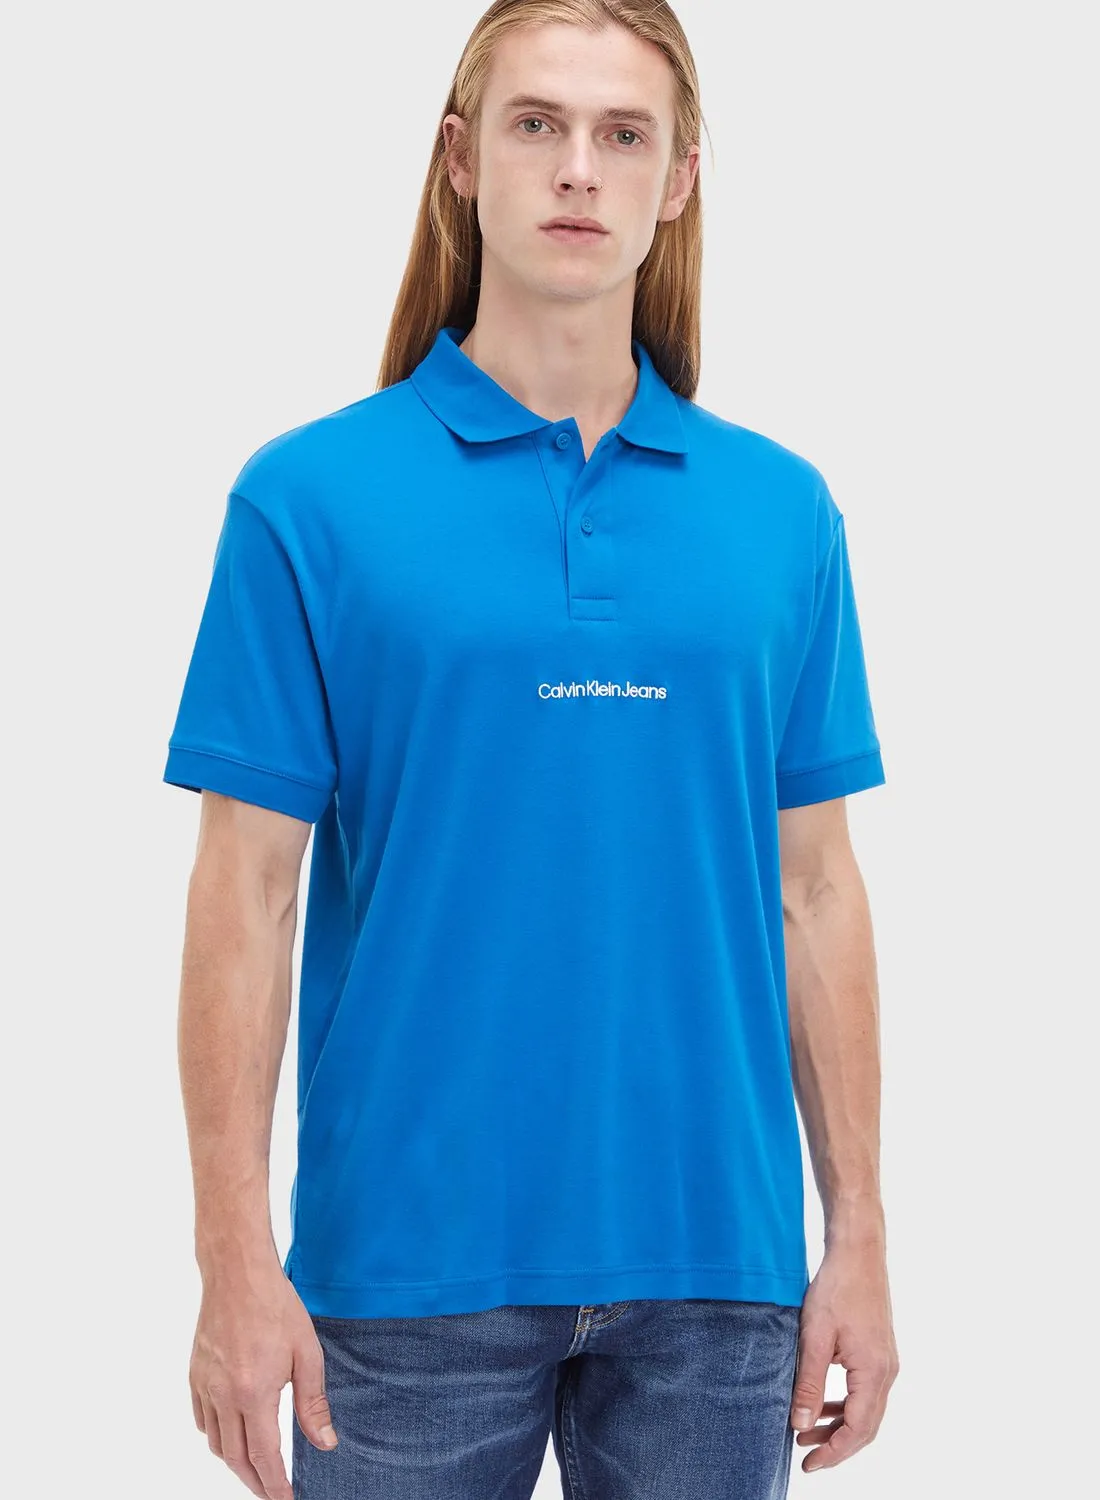 Calvin Klein Jeans Institutional Polo